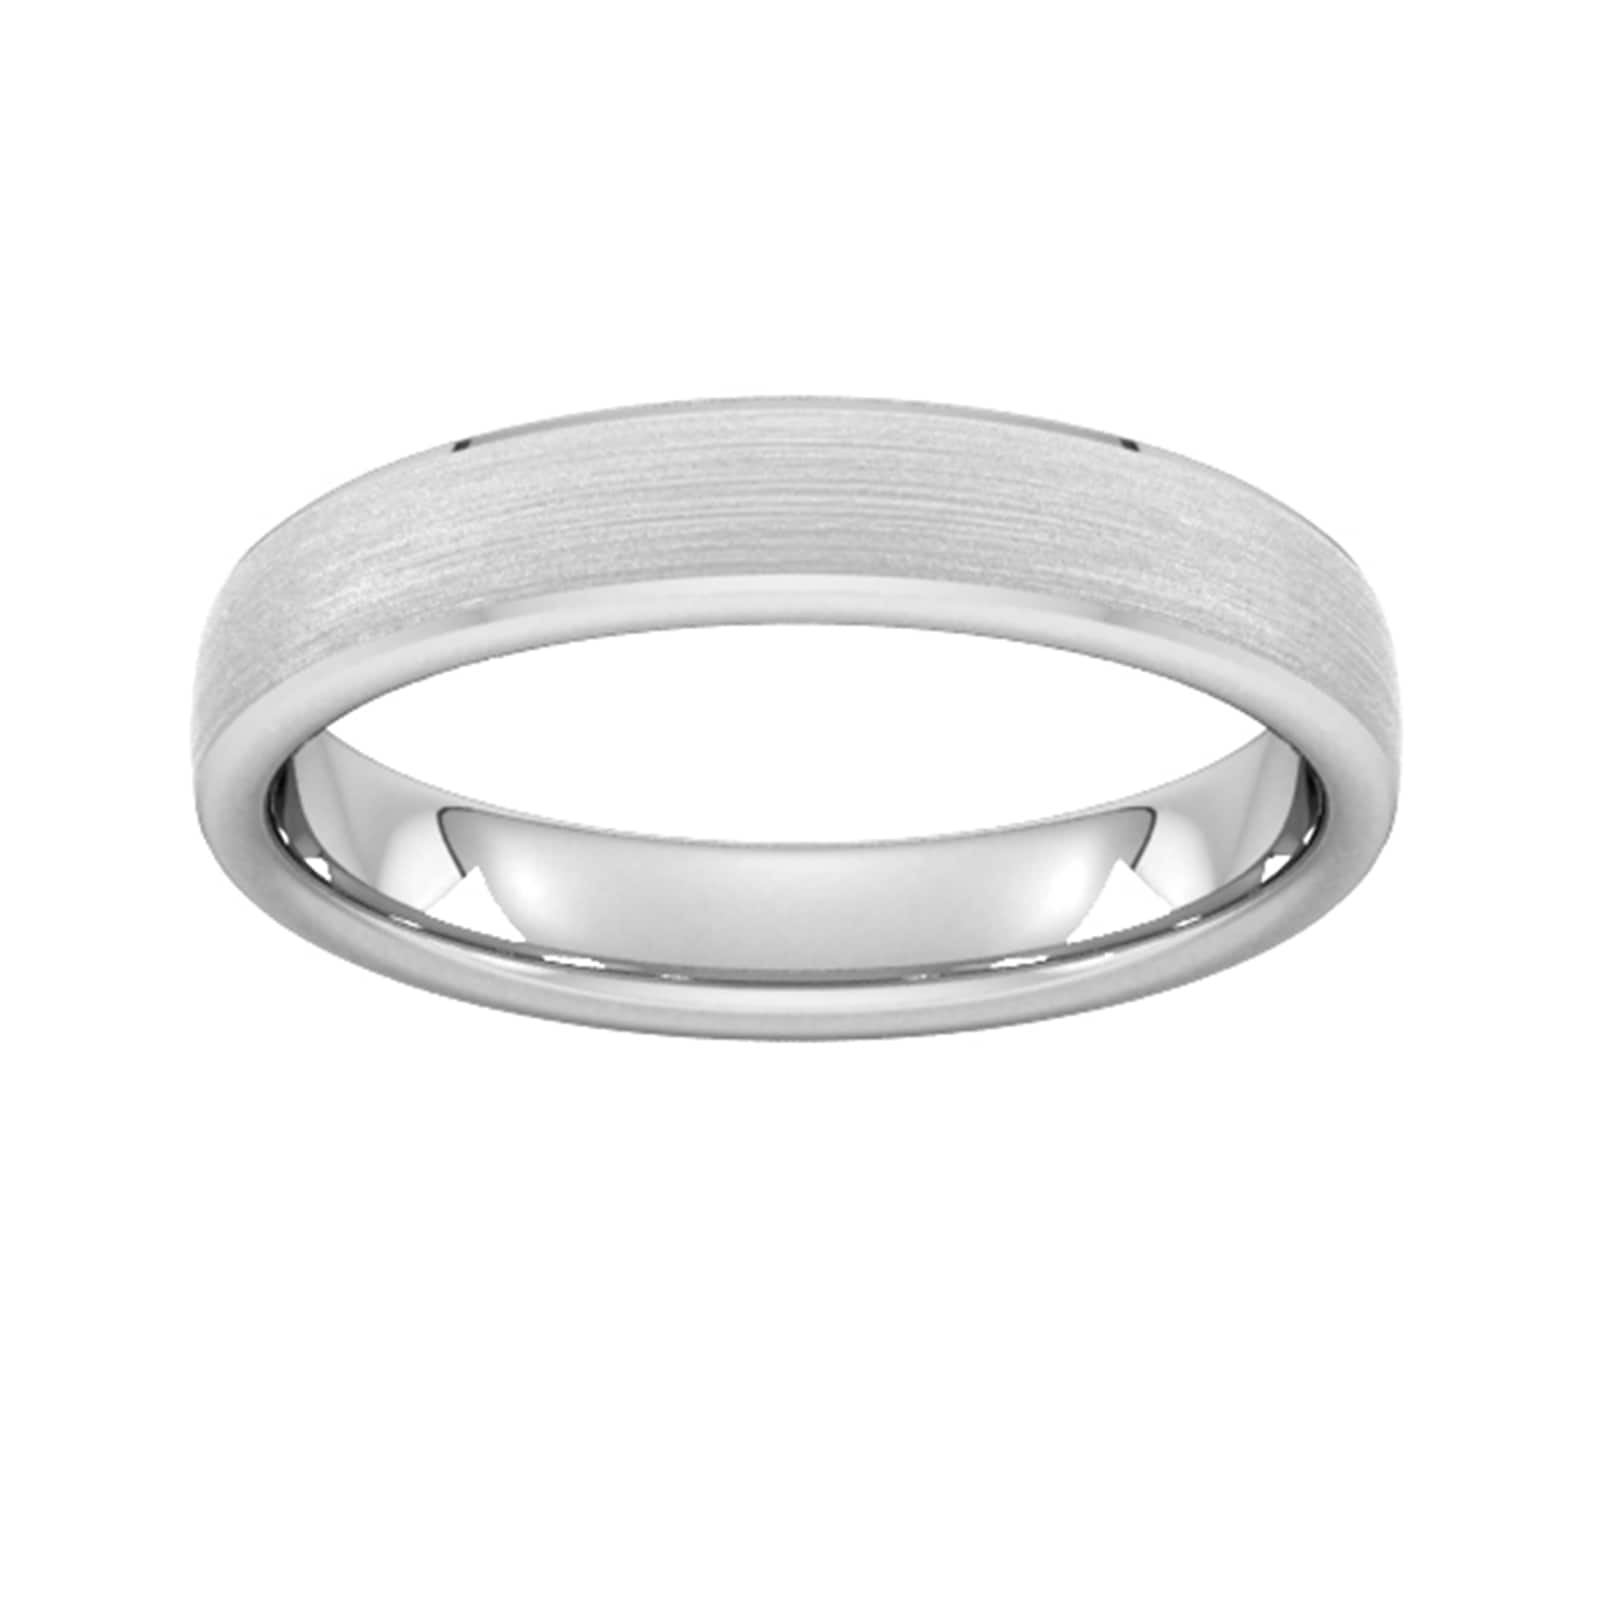 4mm Slight Court Extra Heavy Polished Chamfered Edges With Matt Centre Wedding Ring In 18 Carat White Gold - Ring Size J